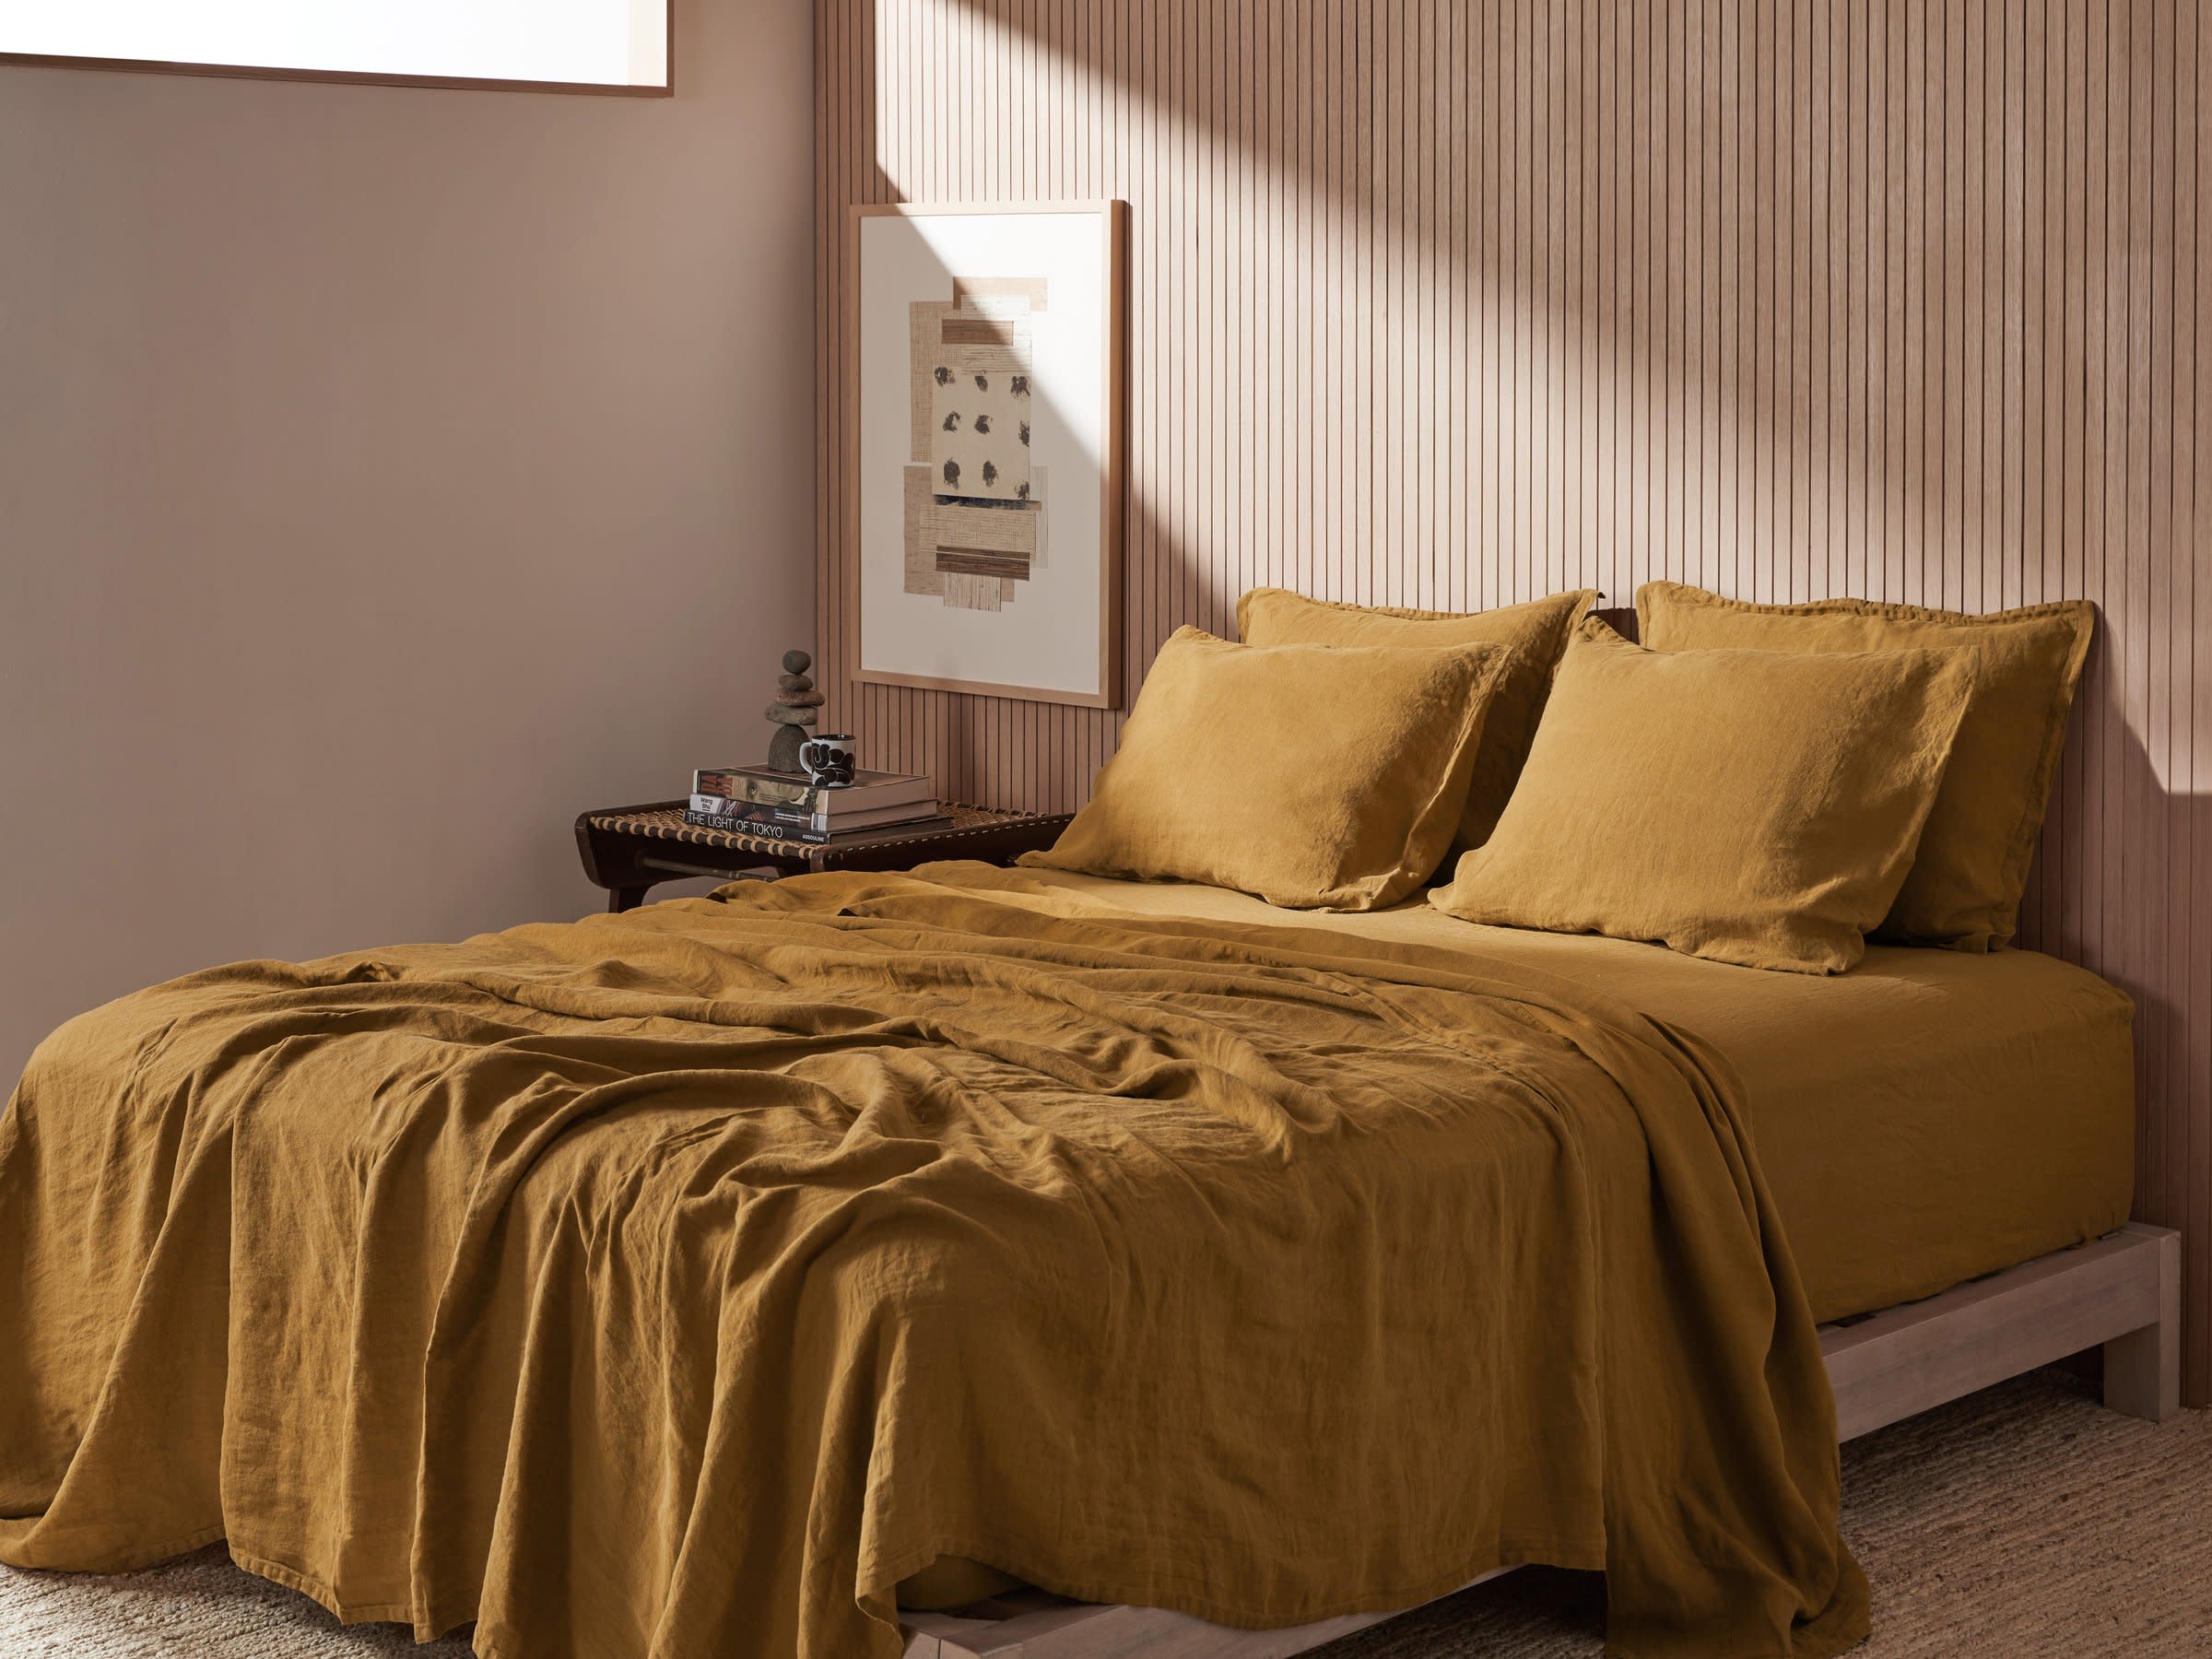 Ochre Linen Fitted Sheet Shown In A Room